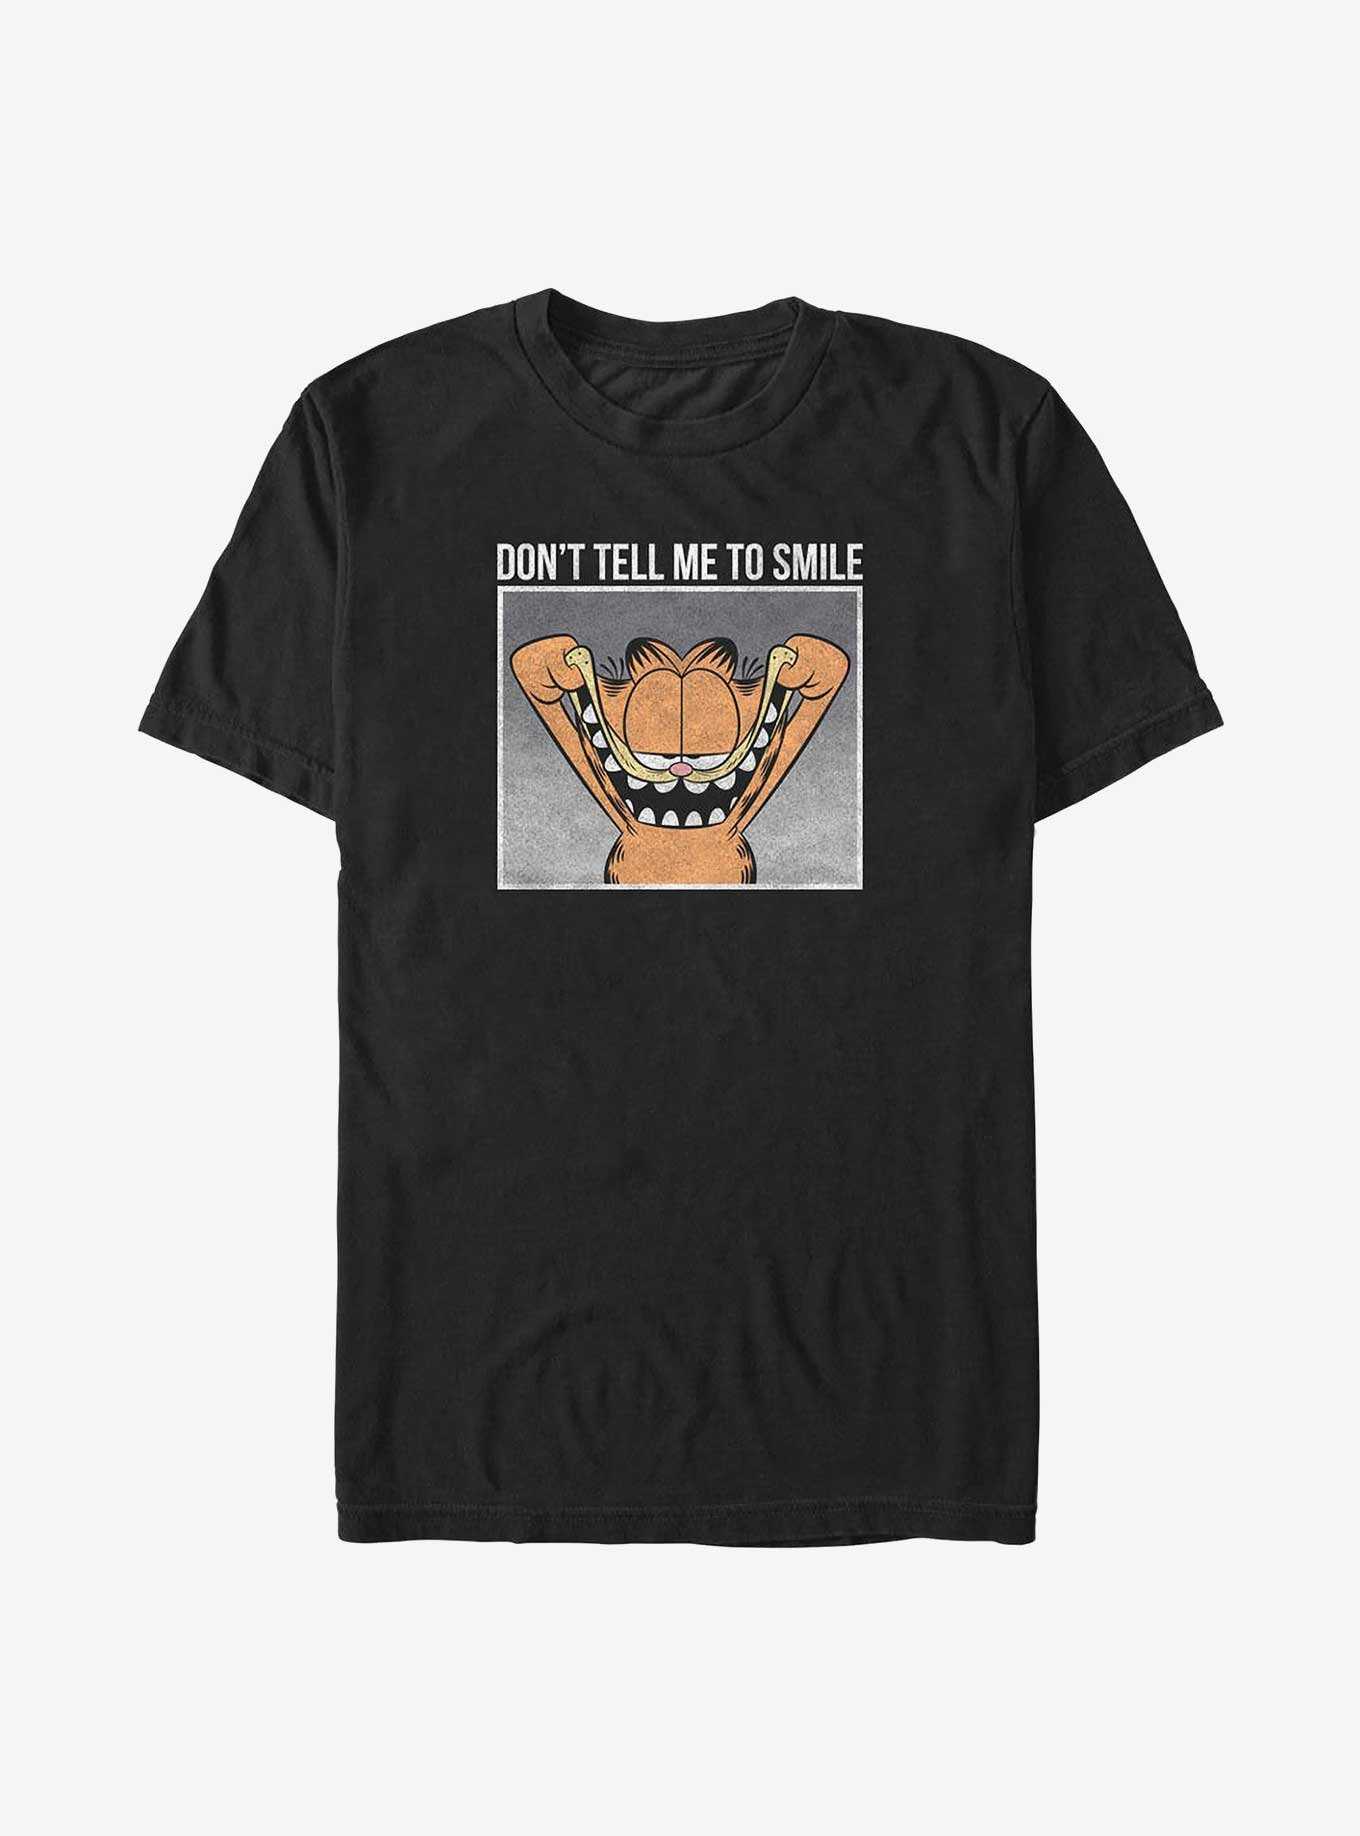 Garfield Don't Tell Me To Smile Big & Tall T-Shirt, , hi-res